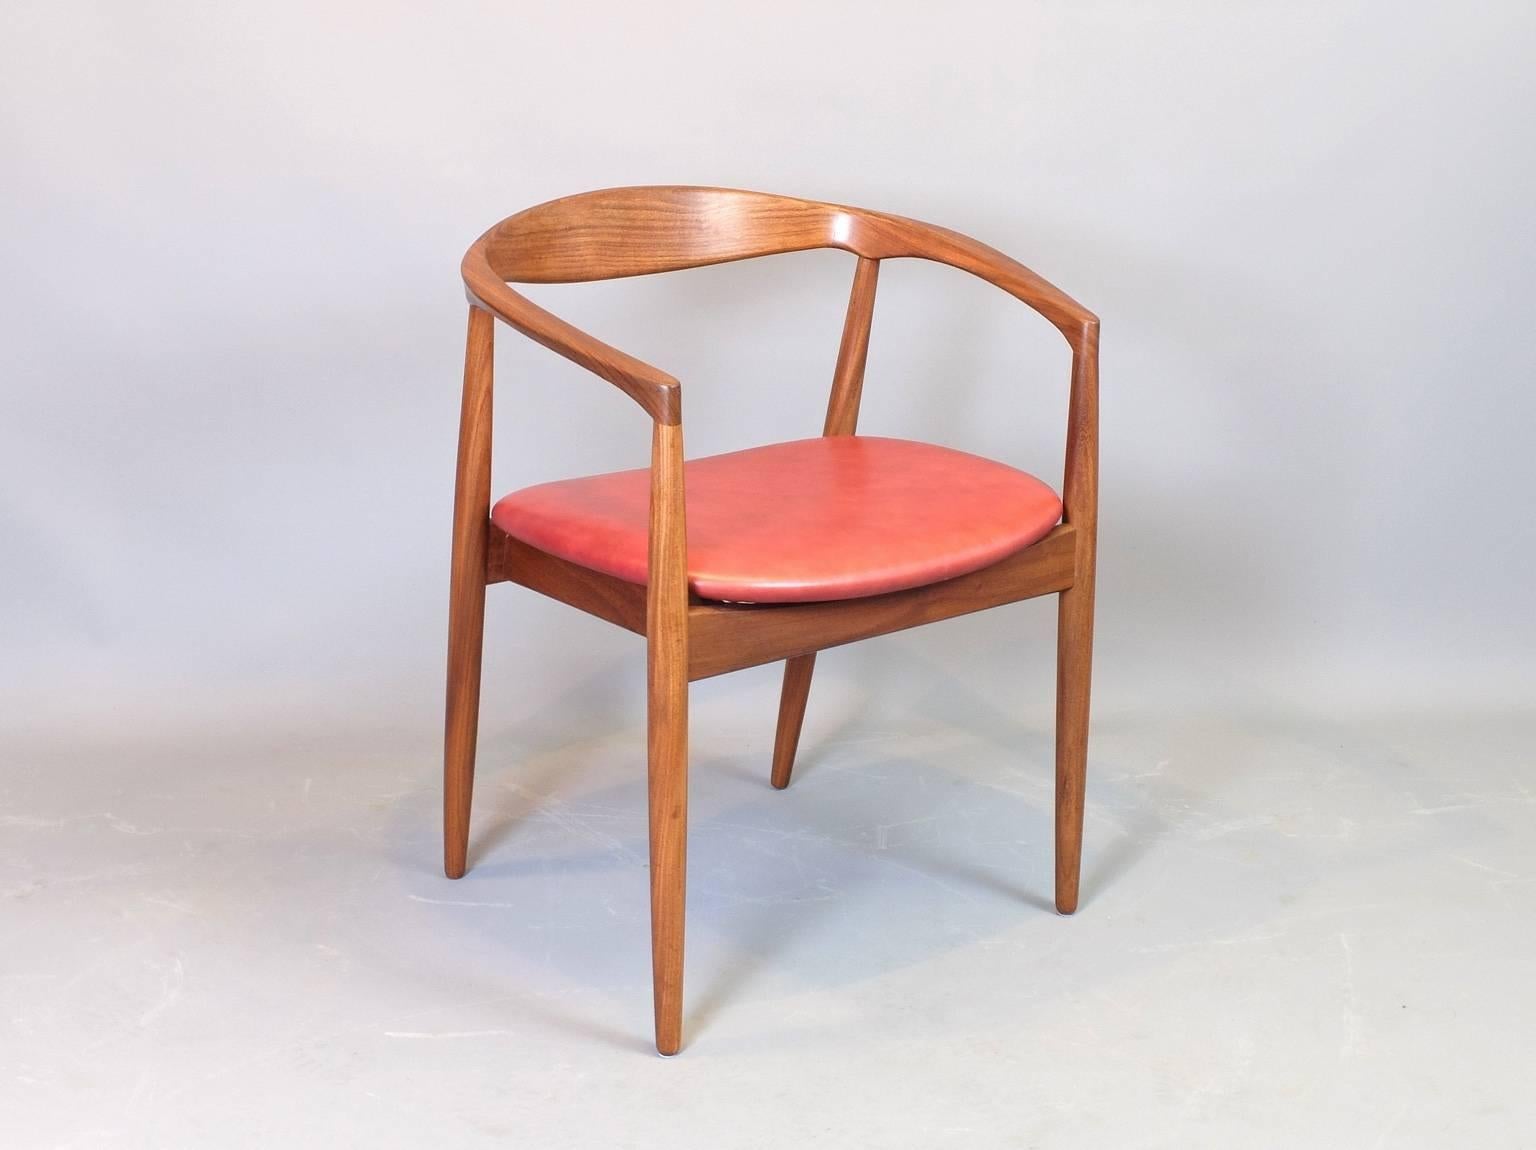 A single teak armchair designed by Kai Kristiansen and manufactured by Magnus Olesen in Denmark in the 1960s. The arms of this curved, round back chair bear similarities to the Paper Knife chair also by Kai Kristiansen. This model is the Troja and